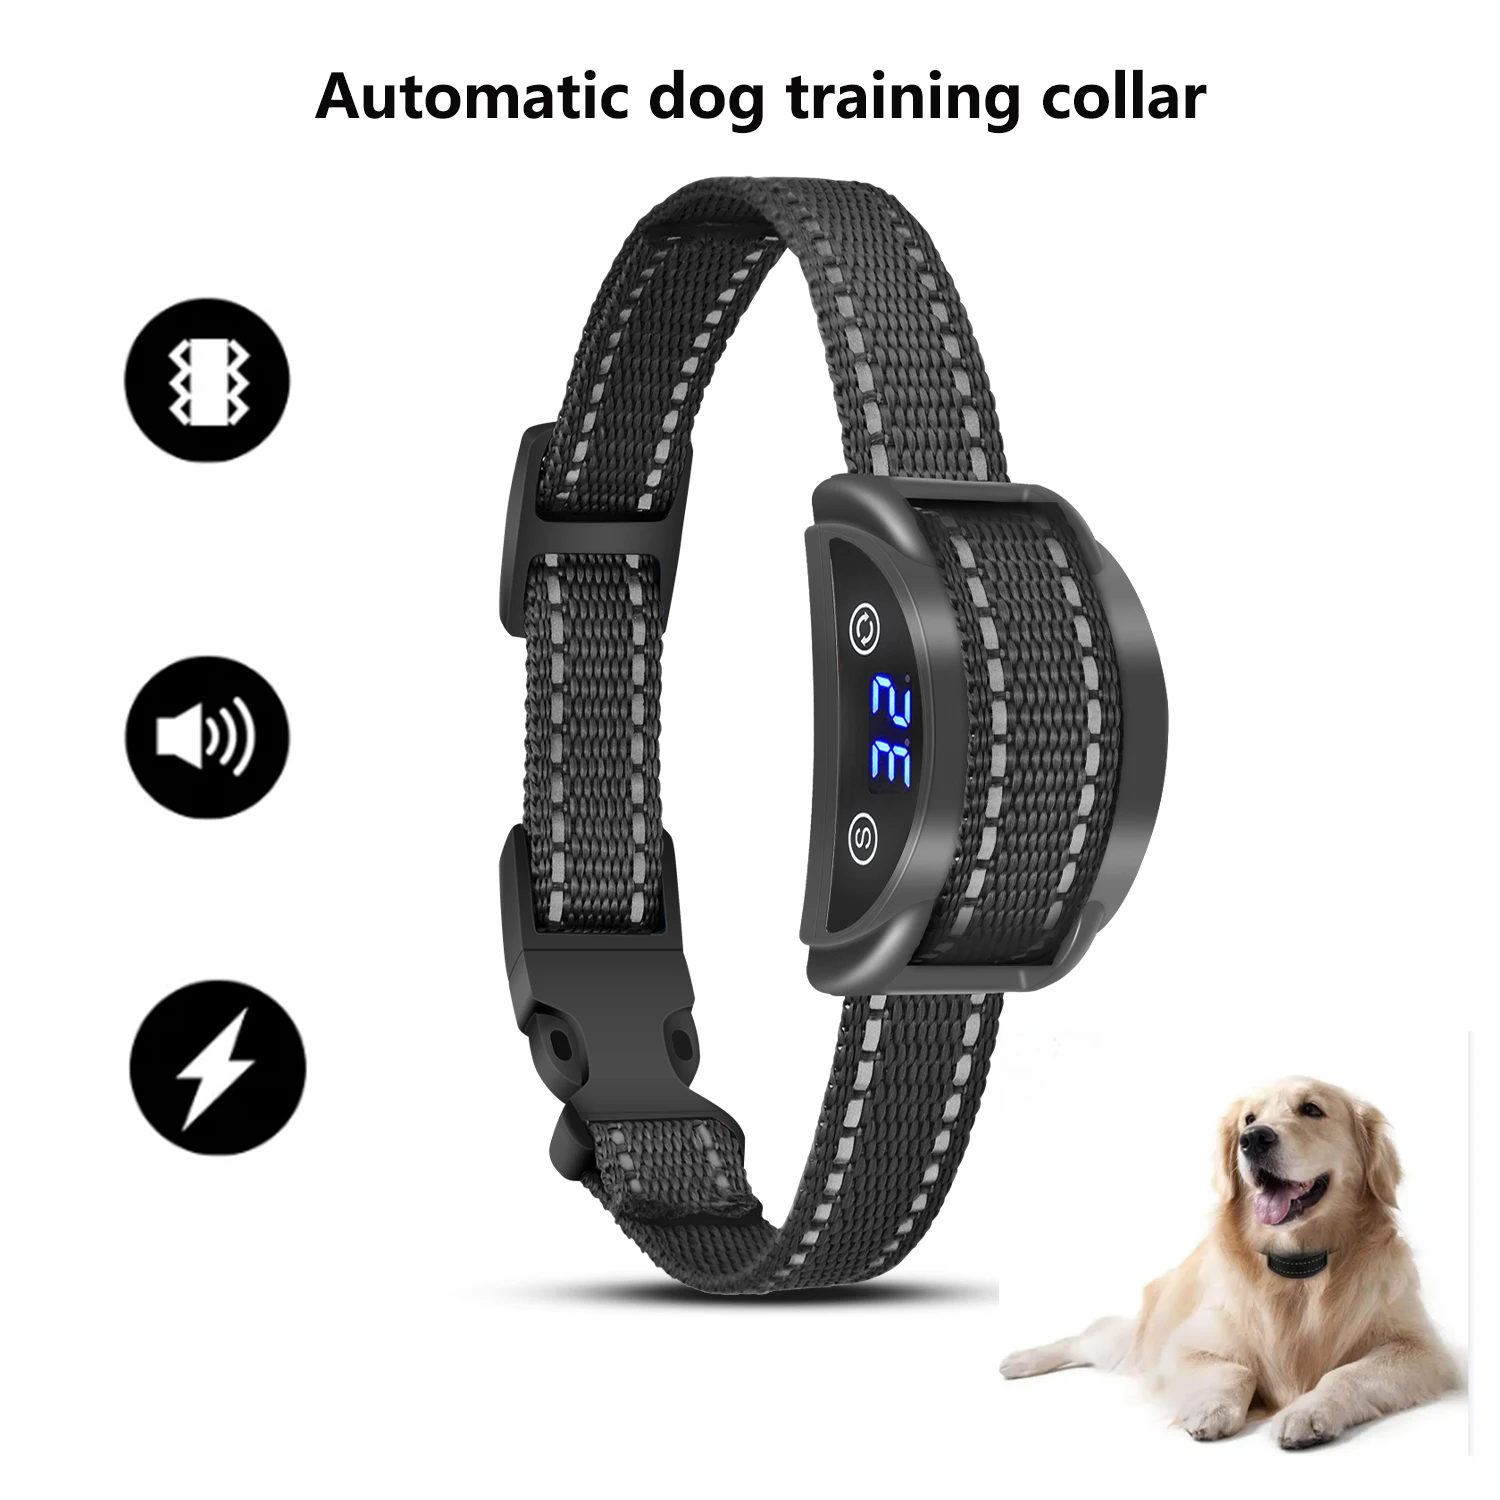 Electric Dog Training Collar Waterproof Bark Control Collar Rechargeable Anti-barking Accessories Training collar for Pet Dogs